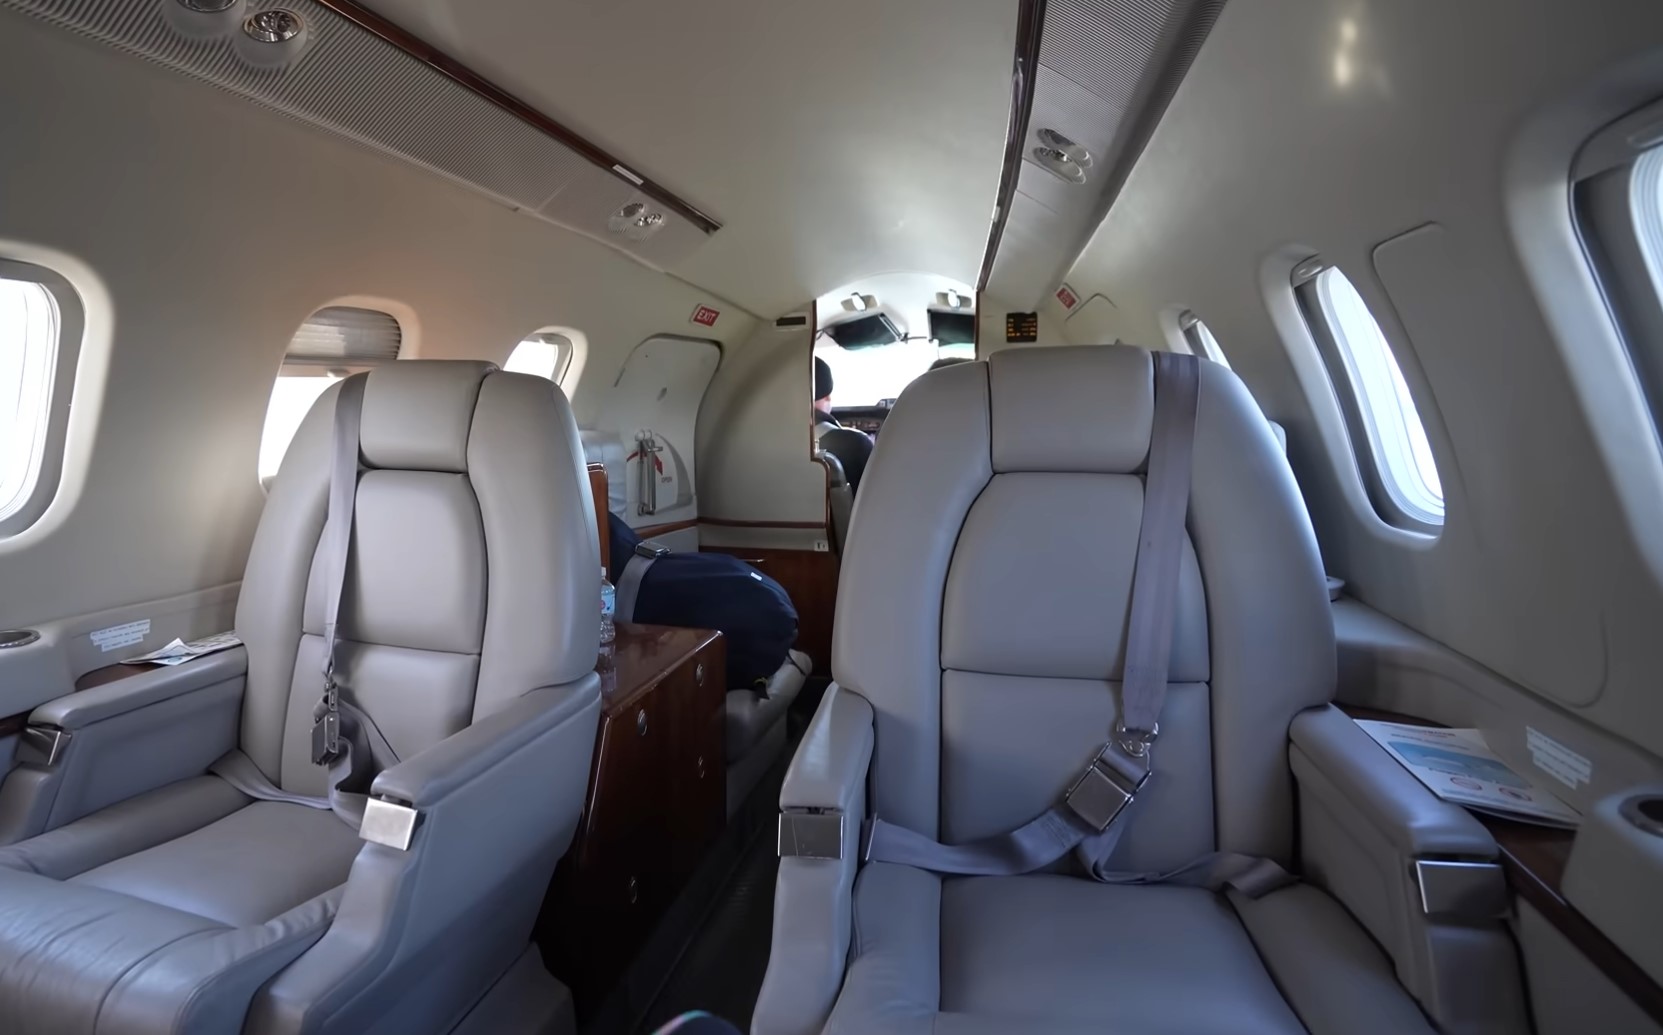 YouTuber stuns people by using 'Uber' private jet service worth over $500 7